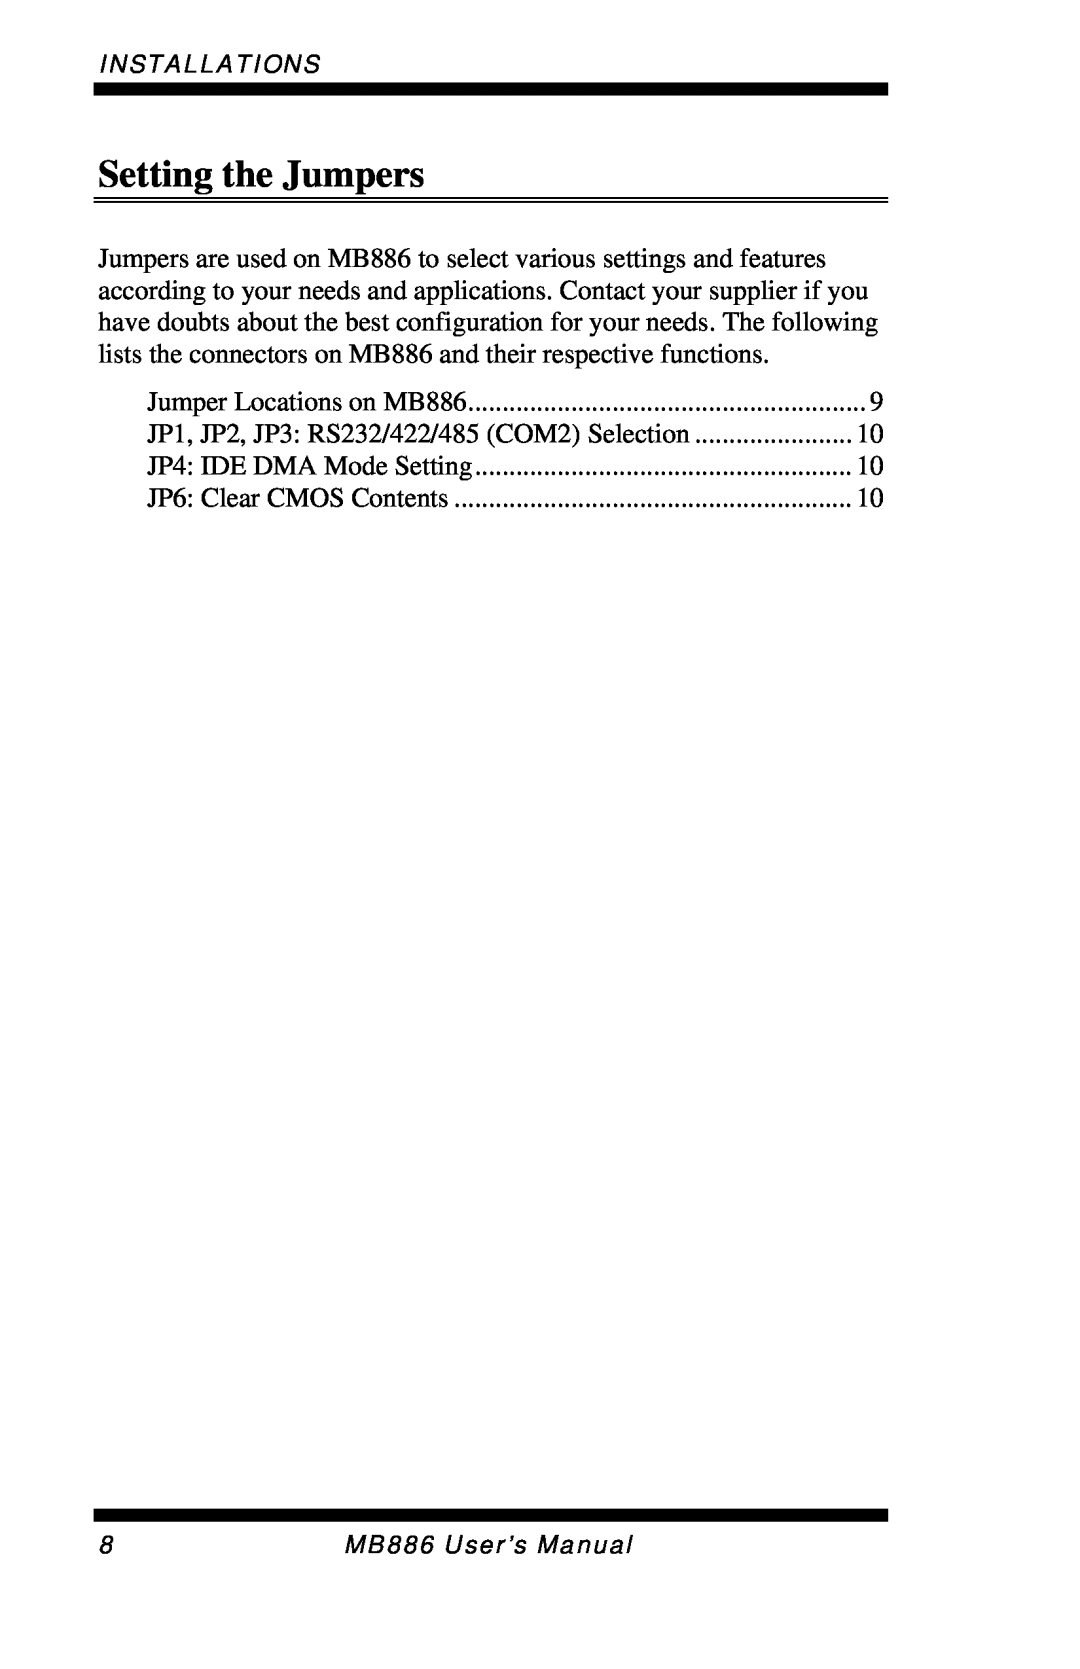 Intel MB886 user manual Setting the Jumpers 